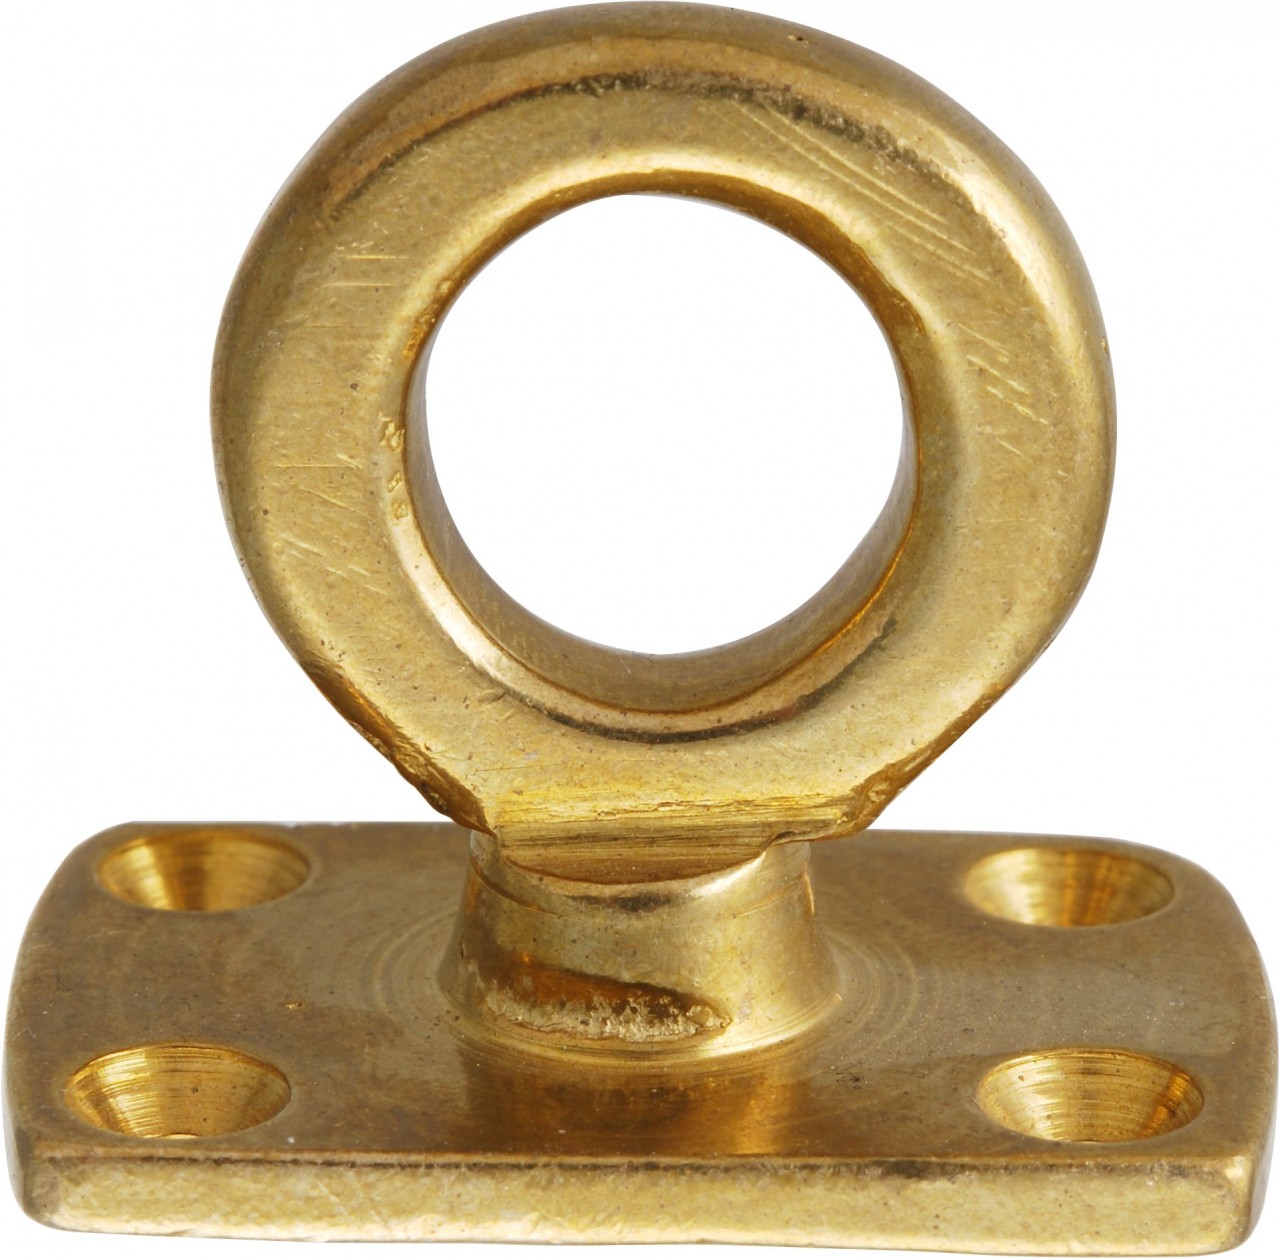 Brass ring handle with ring